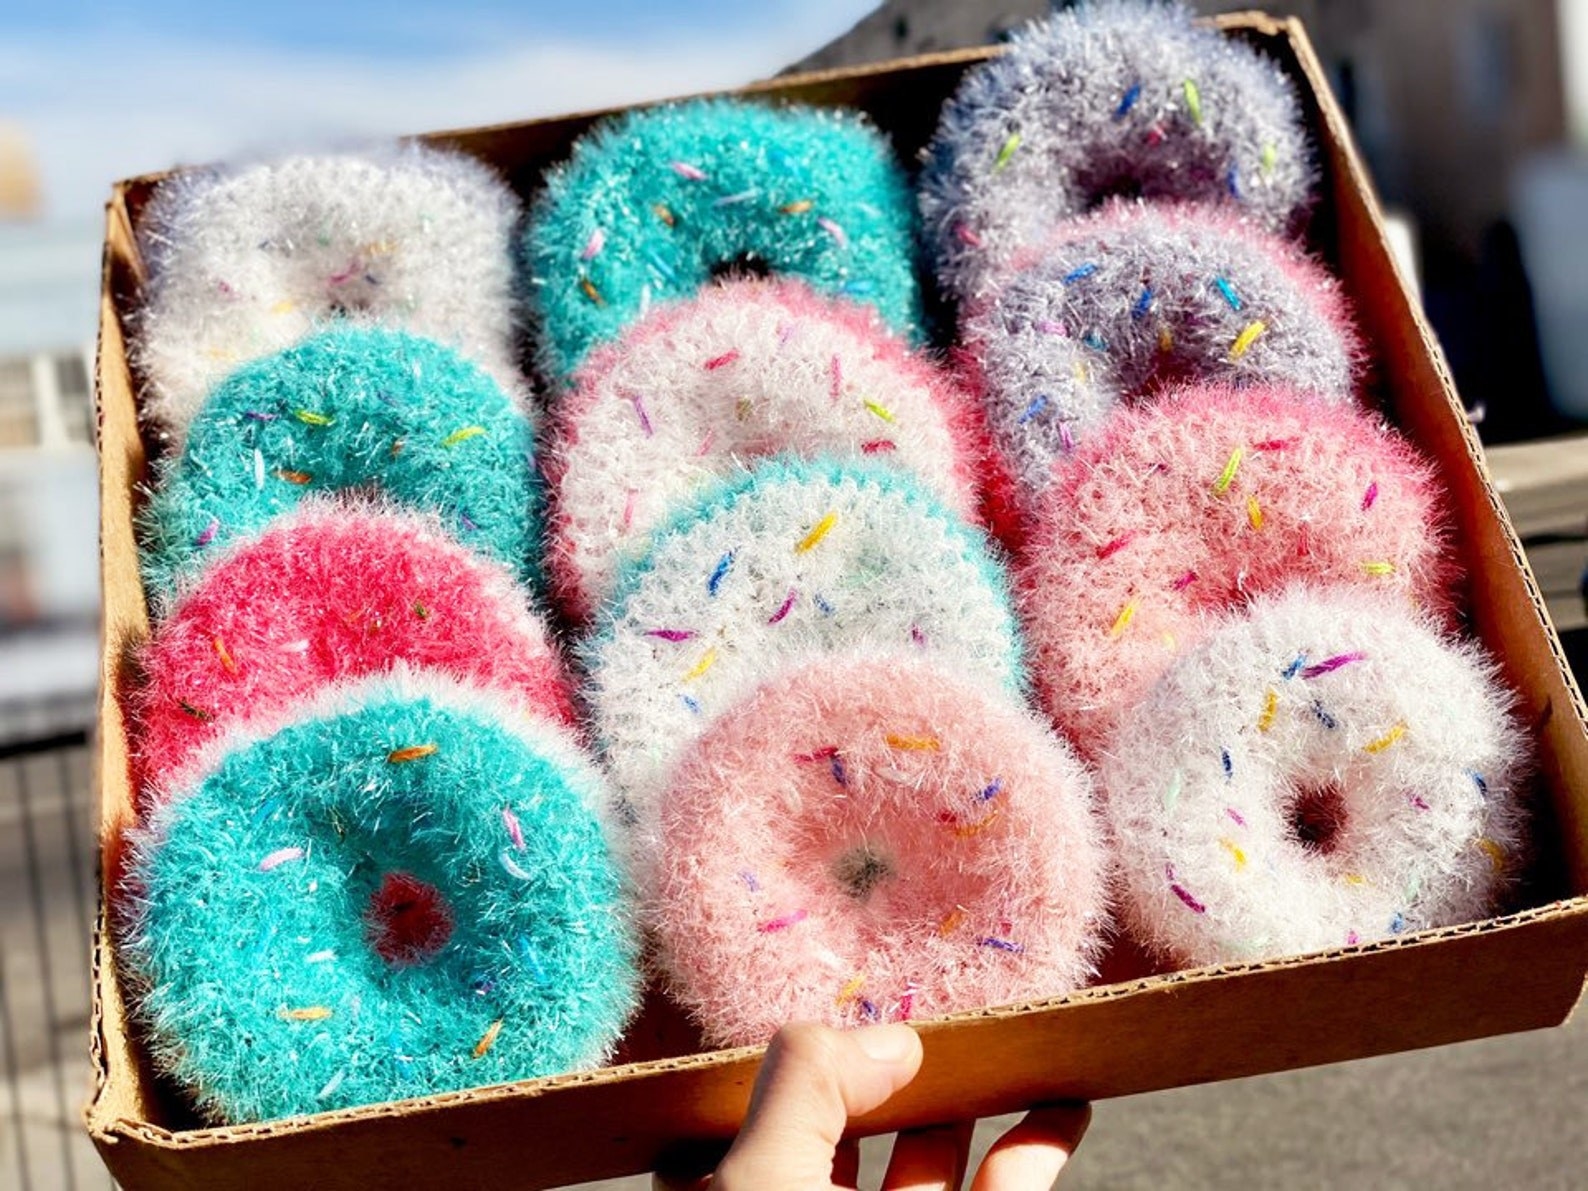 A box of scrubbers shaped like donuts with sprinkles in blue, pink, purple, and white color combos